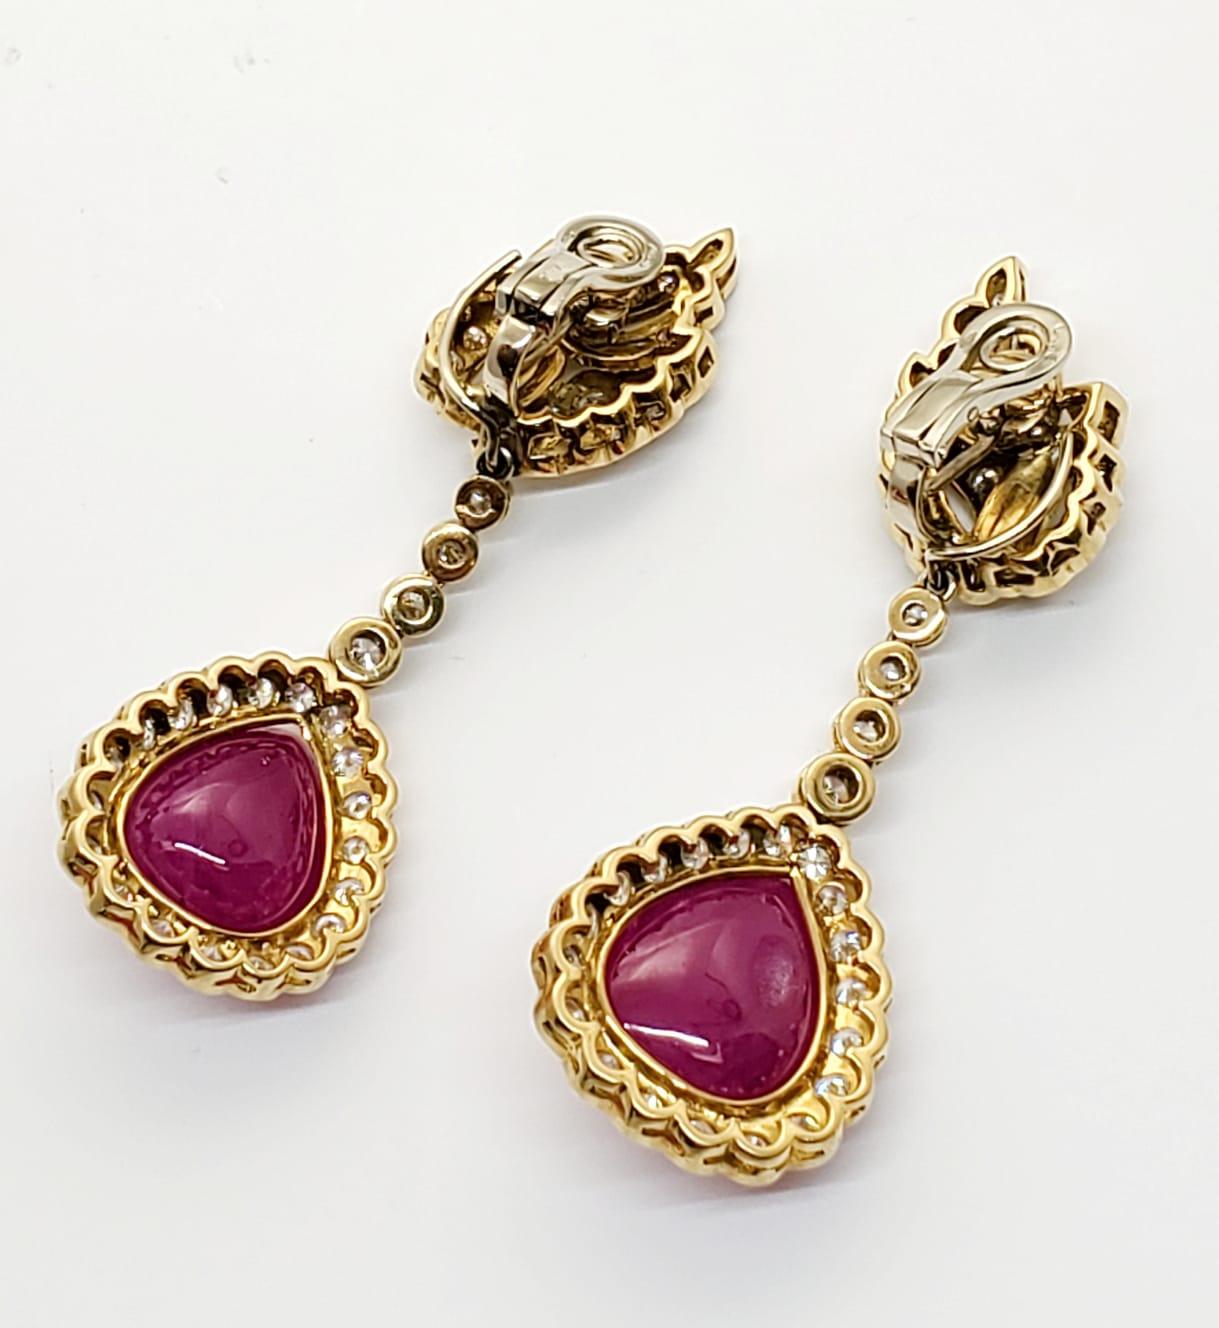 Andreoli Burma Ruby Cabochon Diamond Drop Earrings 18KT Yellow Gold

These Andreoli earrings feature two 49.75 carats of CDC Certified Burmese Rubies Tear Shape Cabochon accented with numerous full cut round brilliant diamonds weighing 7.23 carats